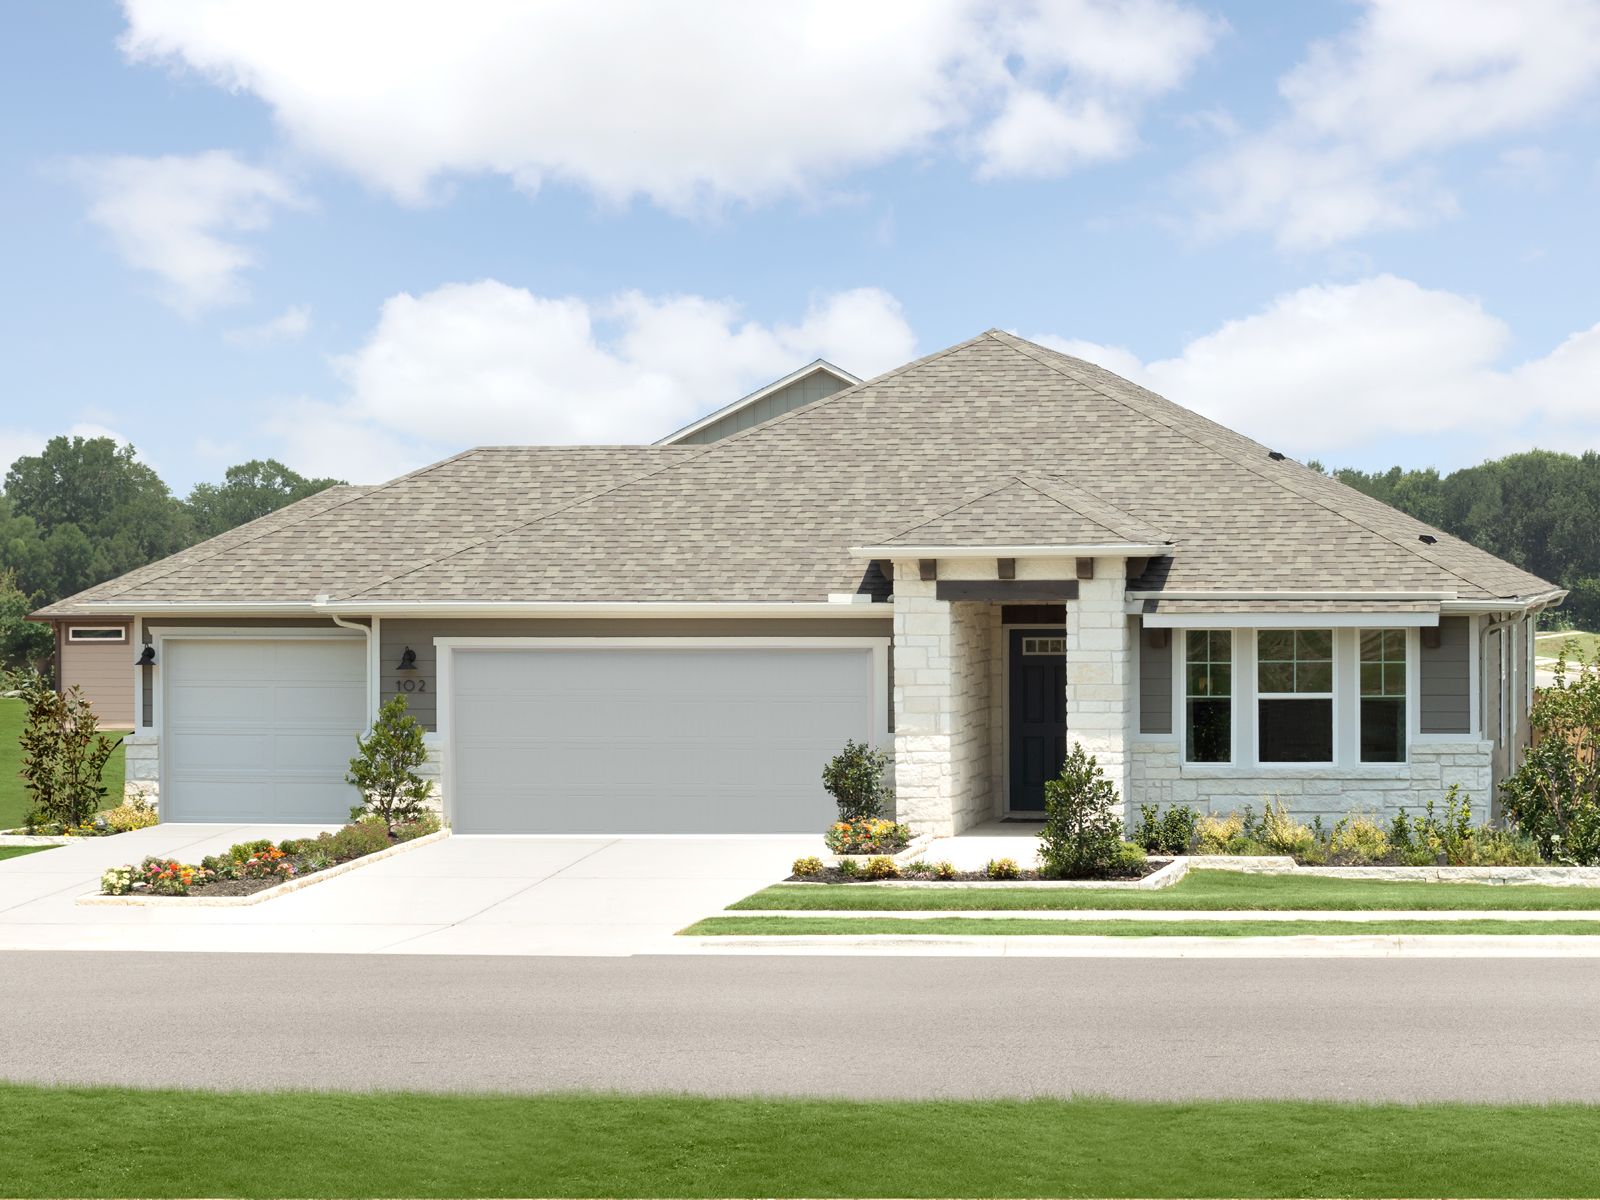 Discover the Henderson floorplan in Riverbend at Double Eagle.